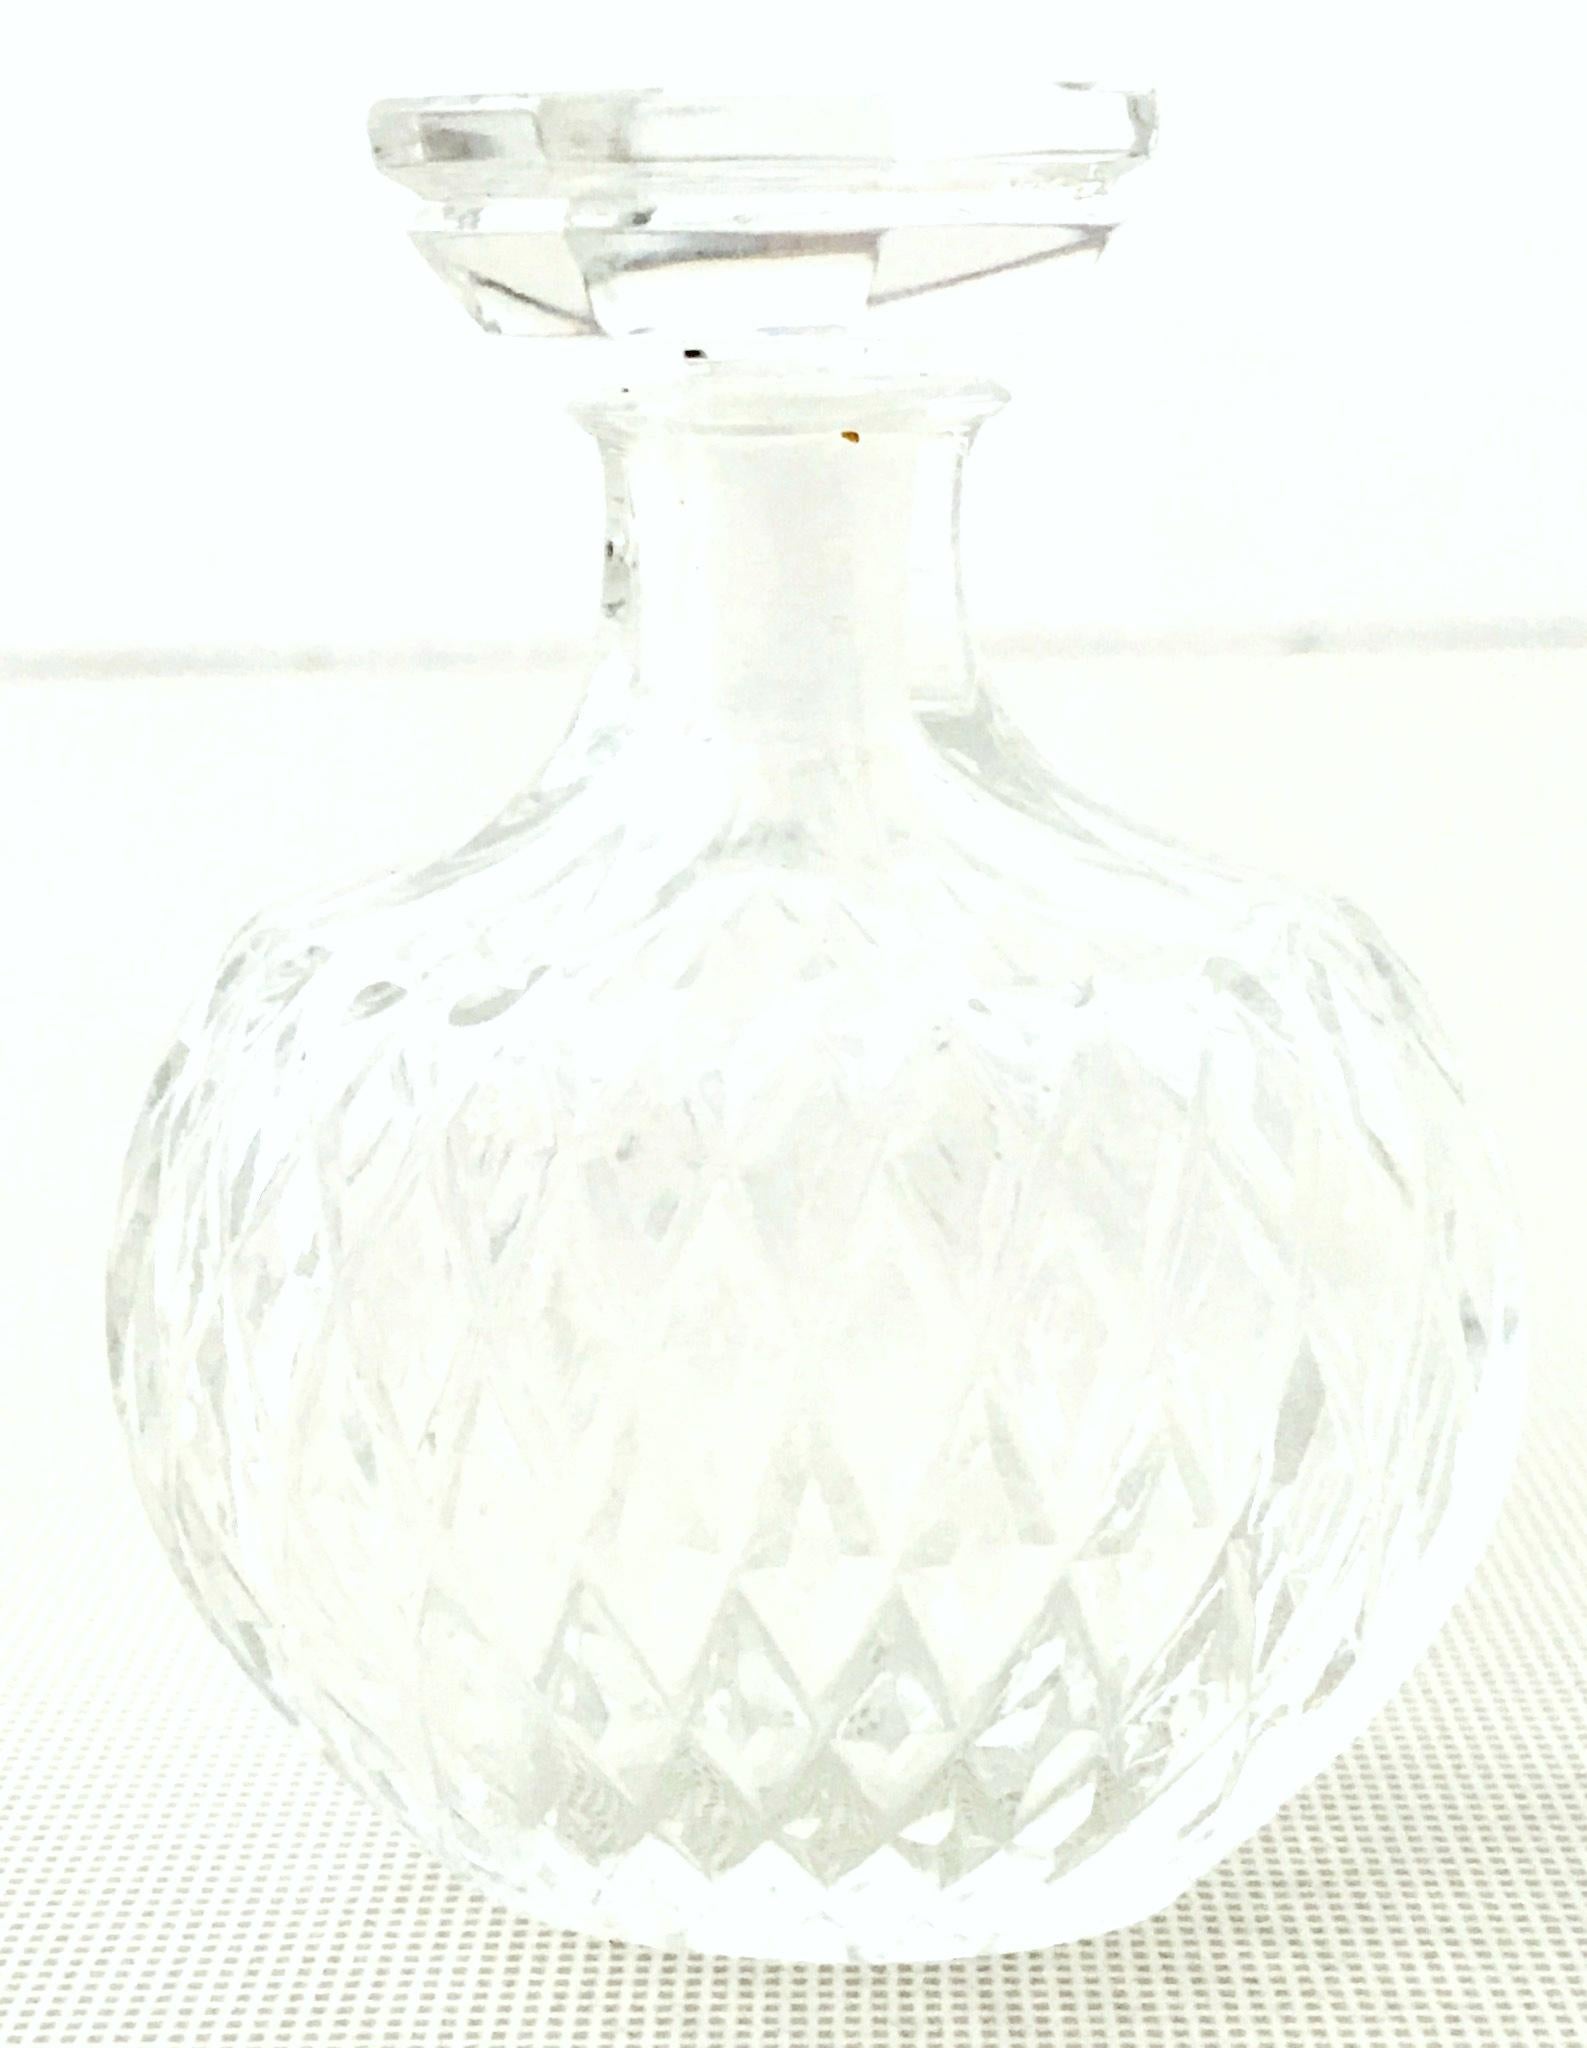 Lalique France cut crystal perfume decanter for Nina Ricci-Signed. This diminutive two-piece Lalique cut crystal decanter features a diamond cut pattern with octagon shaped stopper.
Signed on the underside, Lalique-Made in France, Nina Ricci.